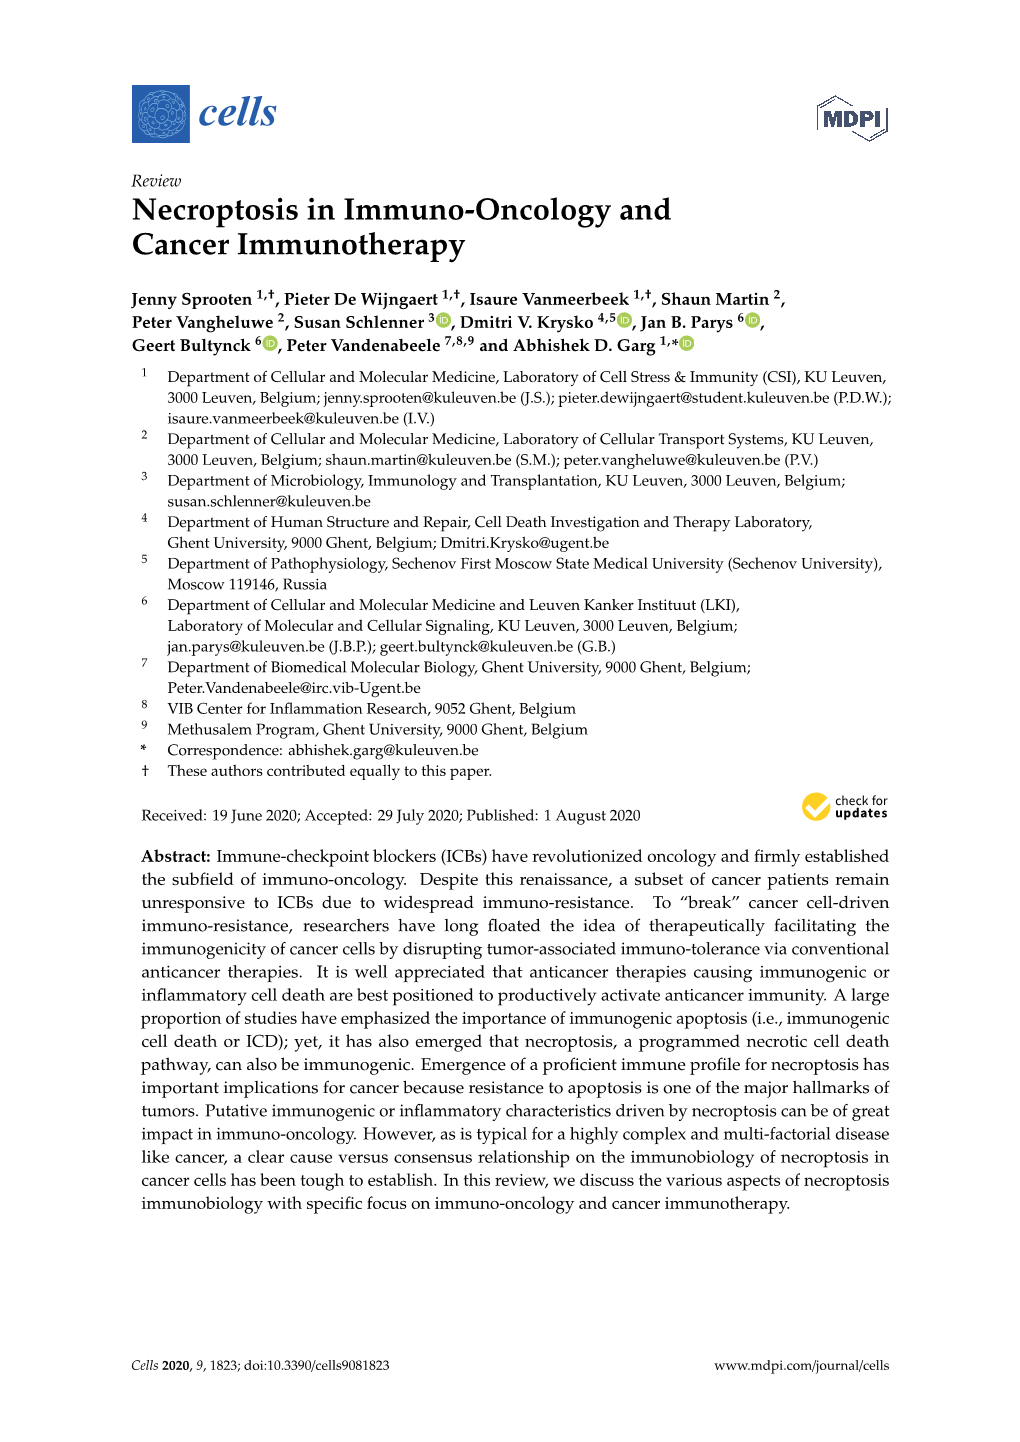 Necroptosis in Immuno-Oncology and Cancer Immunotherapy